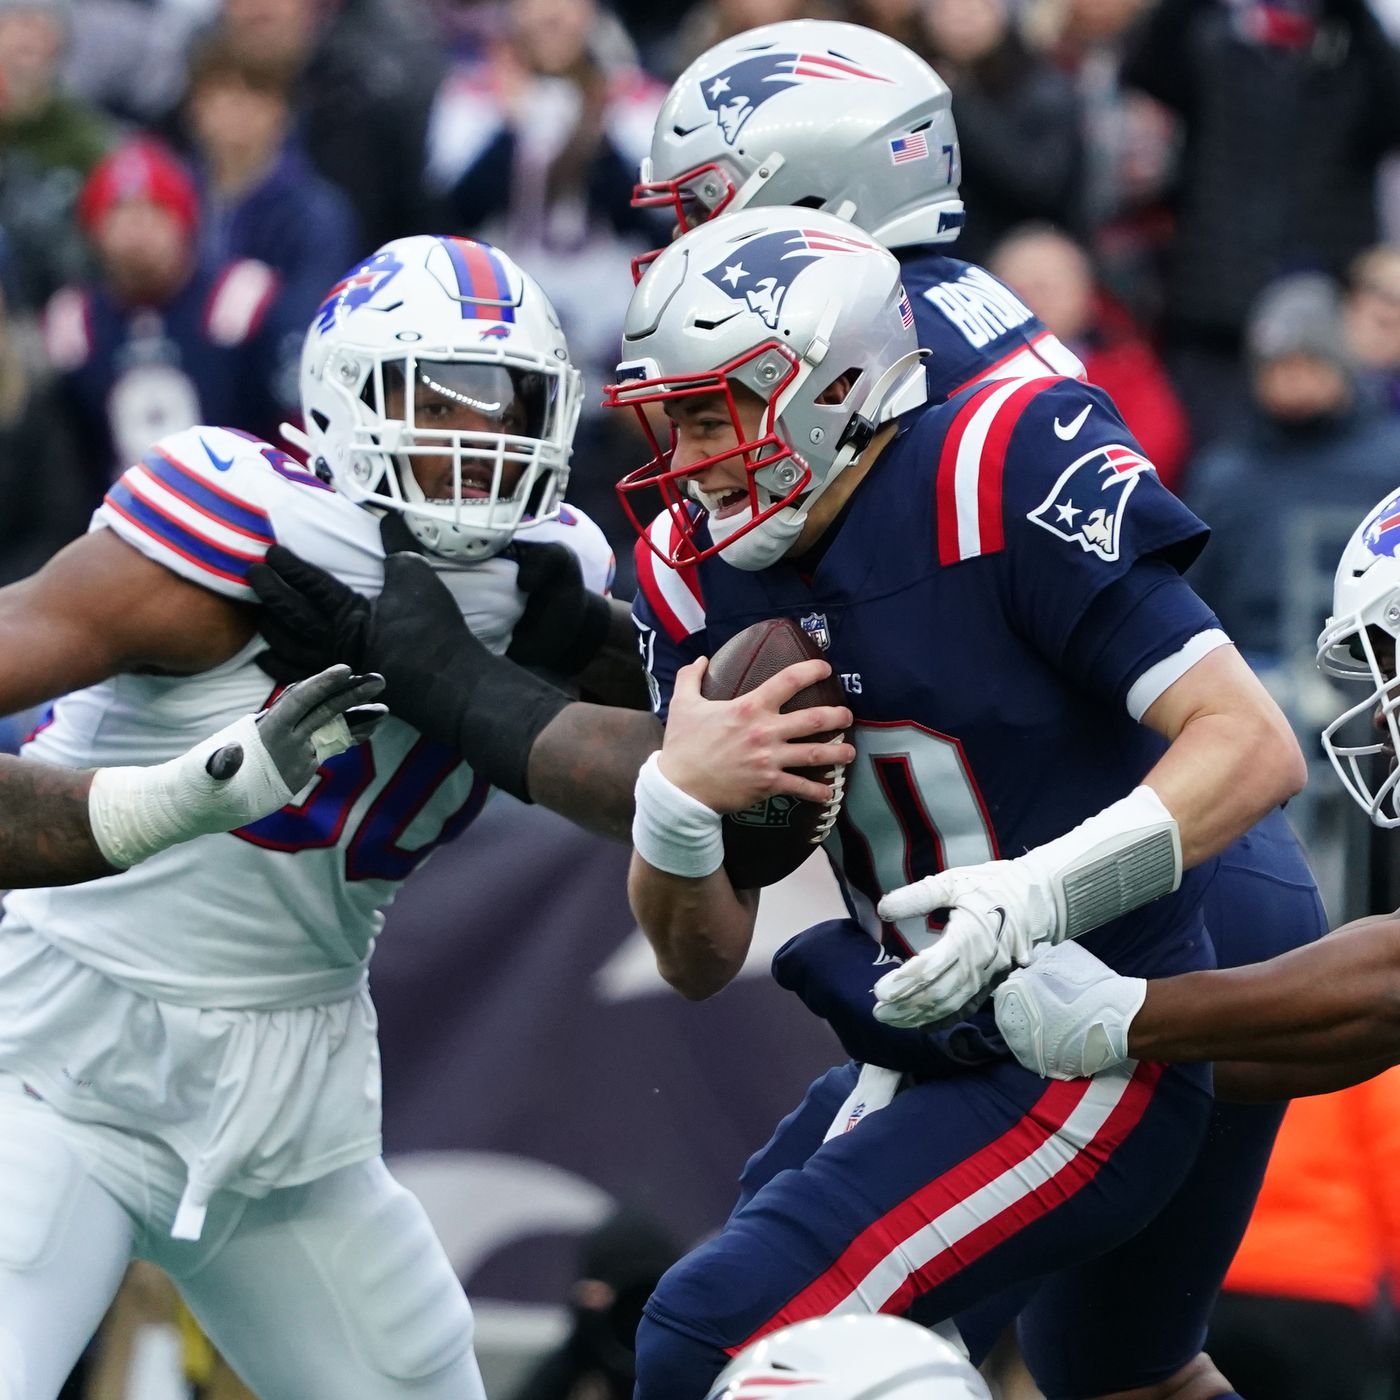 How to watch Patriots vs Bills: Game time, TV, radio, live streaming - Pats  Pulpit